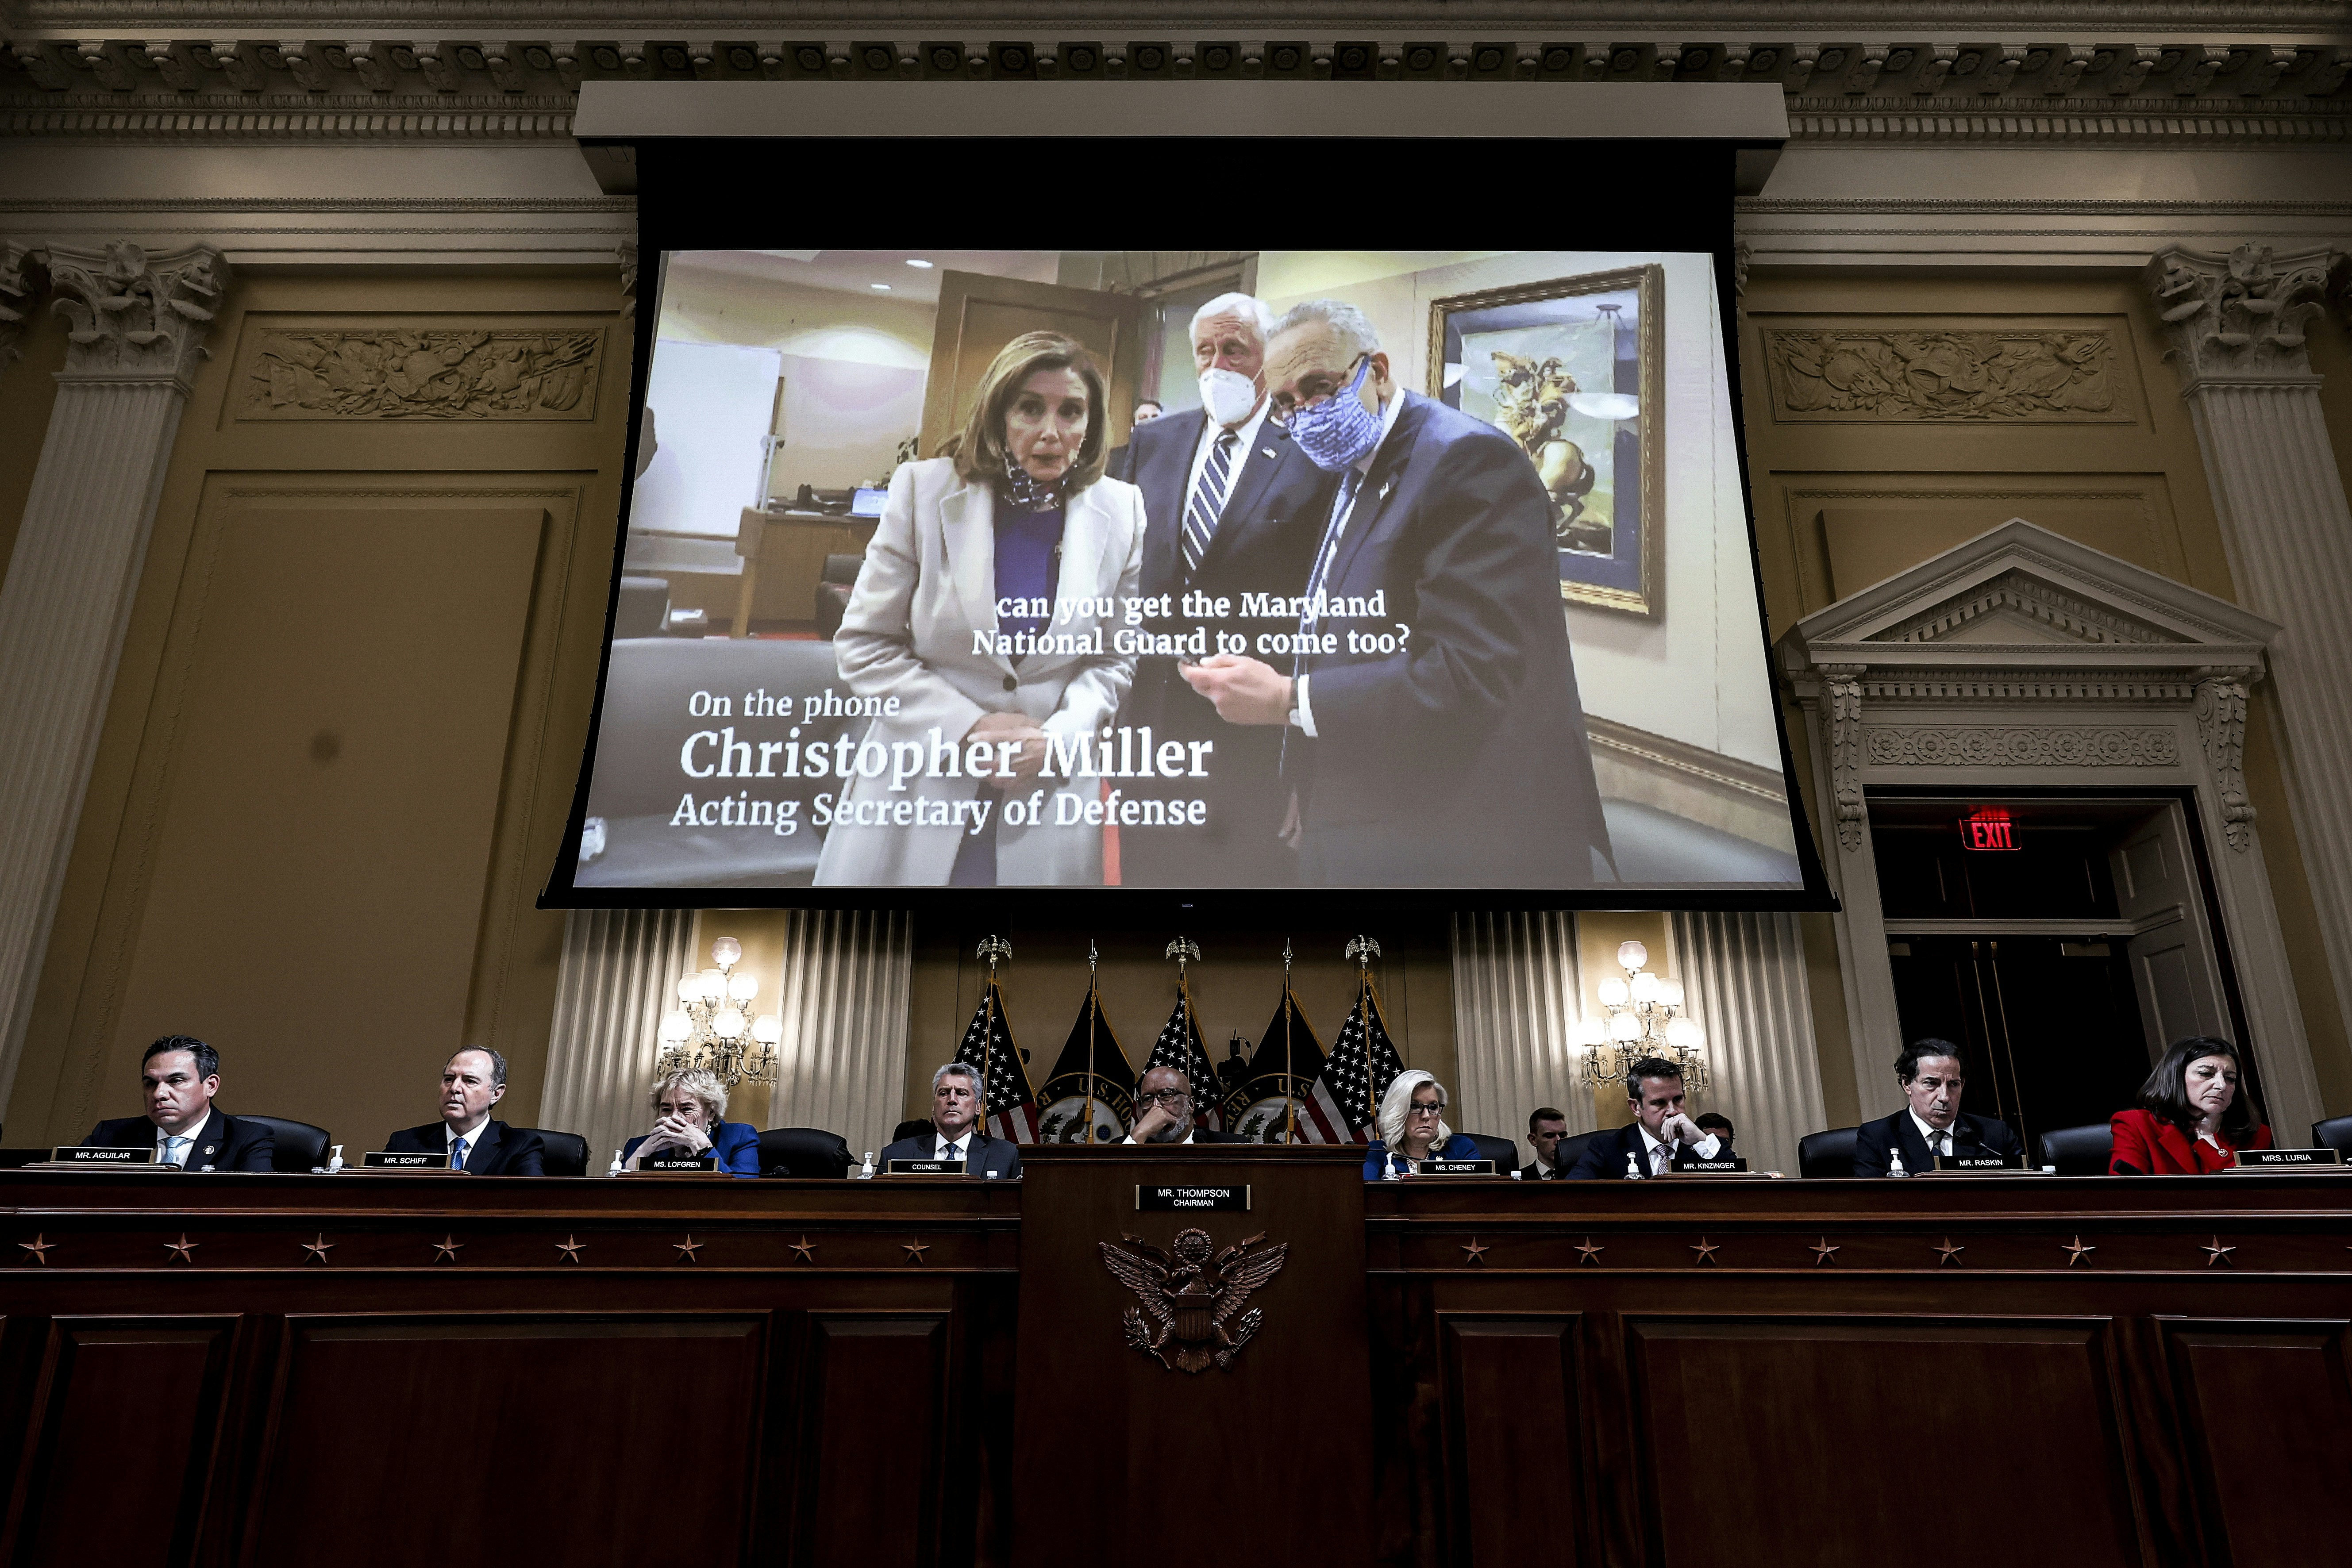 WASHINGTON, DC - OCTOBER 13: A video of U.S. Speaker of the House Nancy Pelosi (D-CA), Senate Majority Leader Charles Schumer (D-NY) and House Majority Leader Steny Hoyer (D-MD)  is played during a hearing by the House Select Committee to Investigate the January 6th Attack on the U.S. Capitol in the Cannon House Office Building on October 13, 2022 in Washington, DC. The bipartisan committee, in possibly its final hearing, has been gathering evidence for almost a year related to the January 6 attack at the U.S. Capitol. On January 6, 2021, supporters of former President Donald Trump attacked the U.S. Capitol Building during an attempt to disrupt a congressional vote to confirm the electoral college win for President Joe Biden. (Photo by Alex Wong/Getty Images)